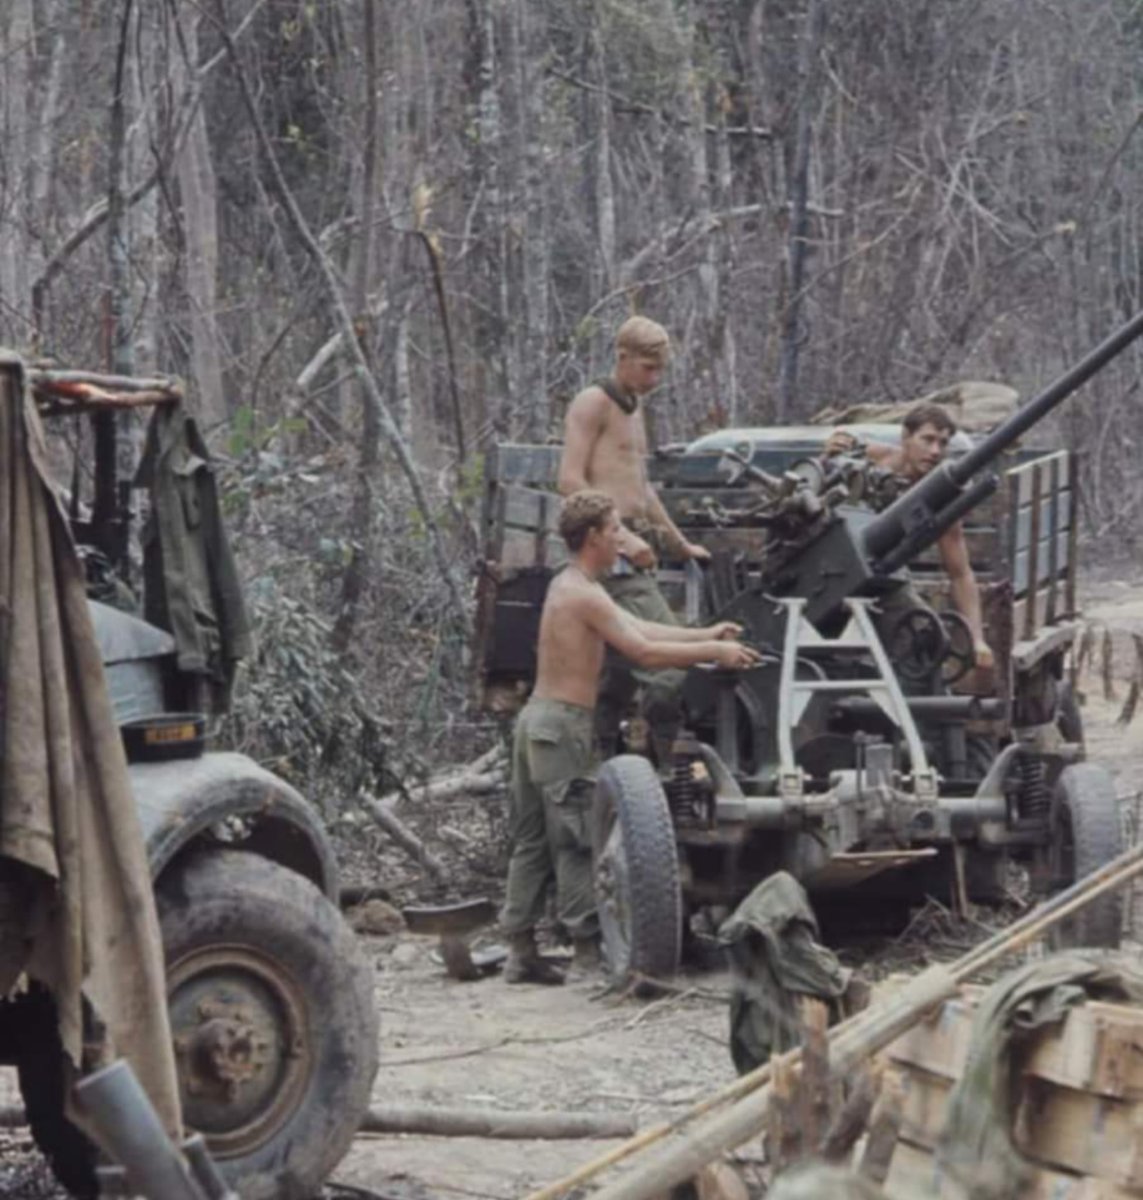 A Salute to the Veterans of A Shau Valley 
#VietnamWar #101stAirborne  #VietnamVeterans #ScreamingEagles #Veterans #VietnamVeteransDay
.
Original description and photos sourced from LIFE Magazine Archives